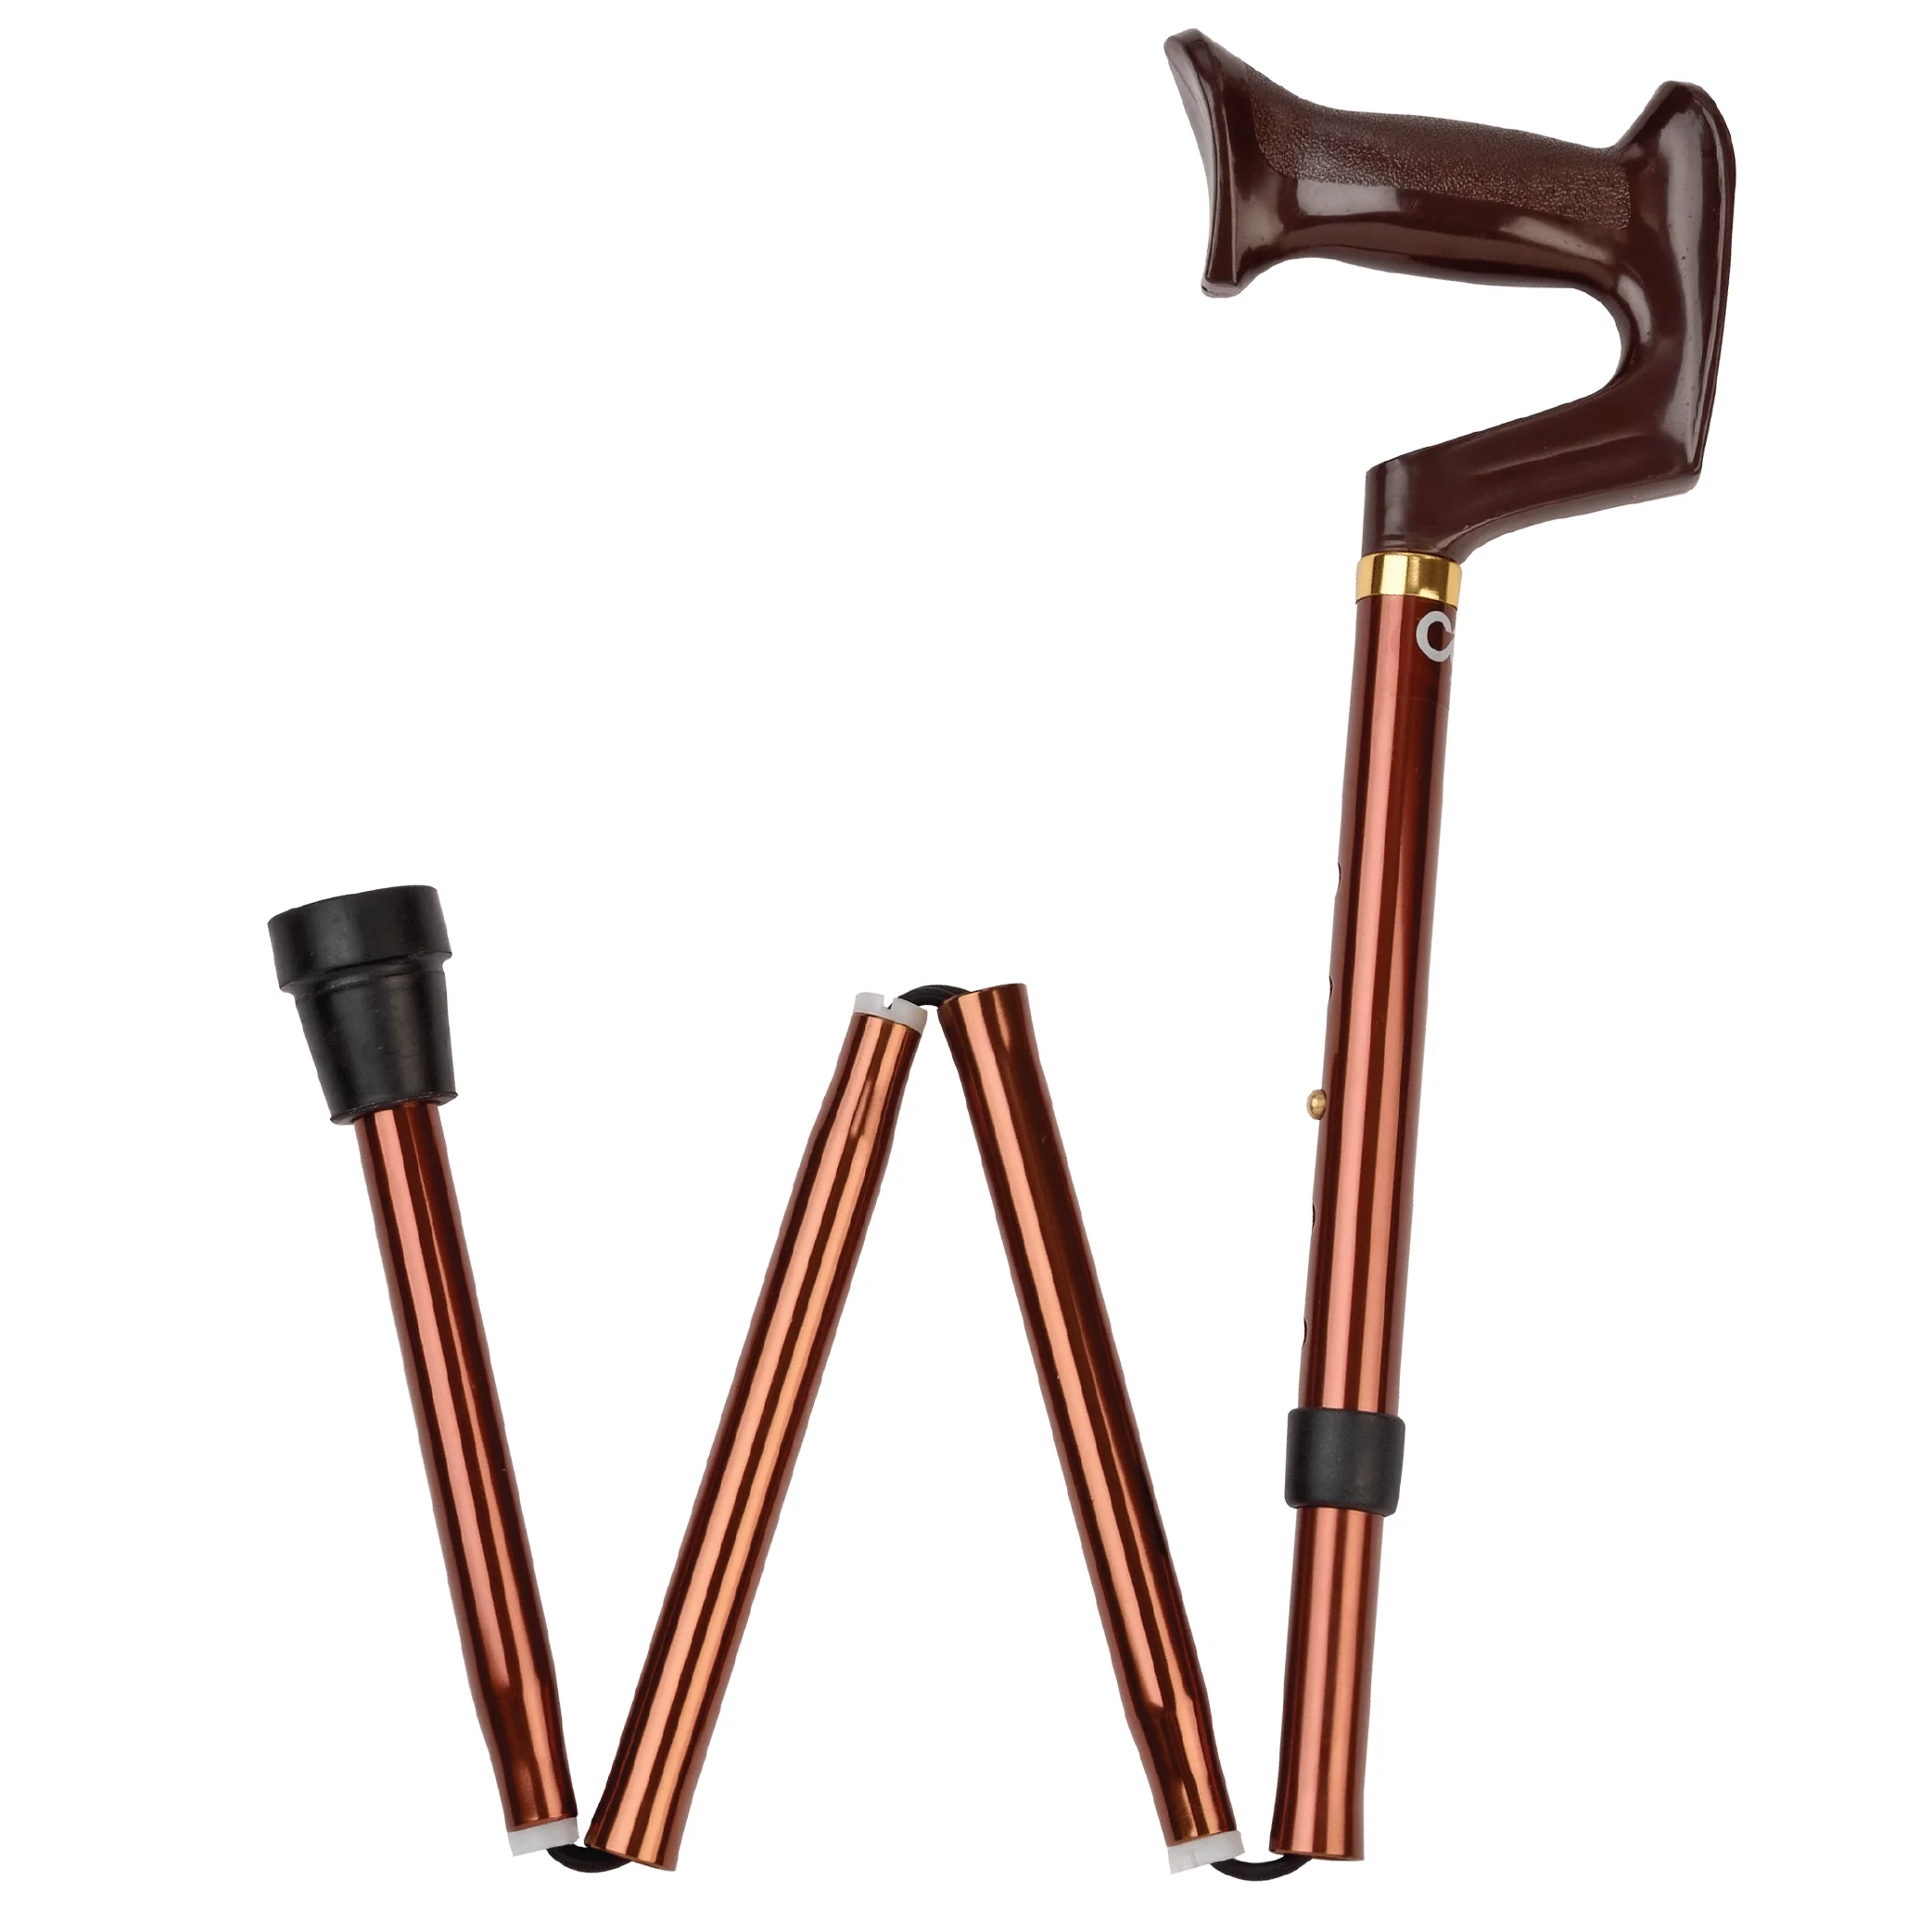 Carex Folding Cane with Adjustable York Handle, A746-00, 1 Each